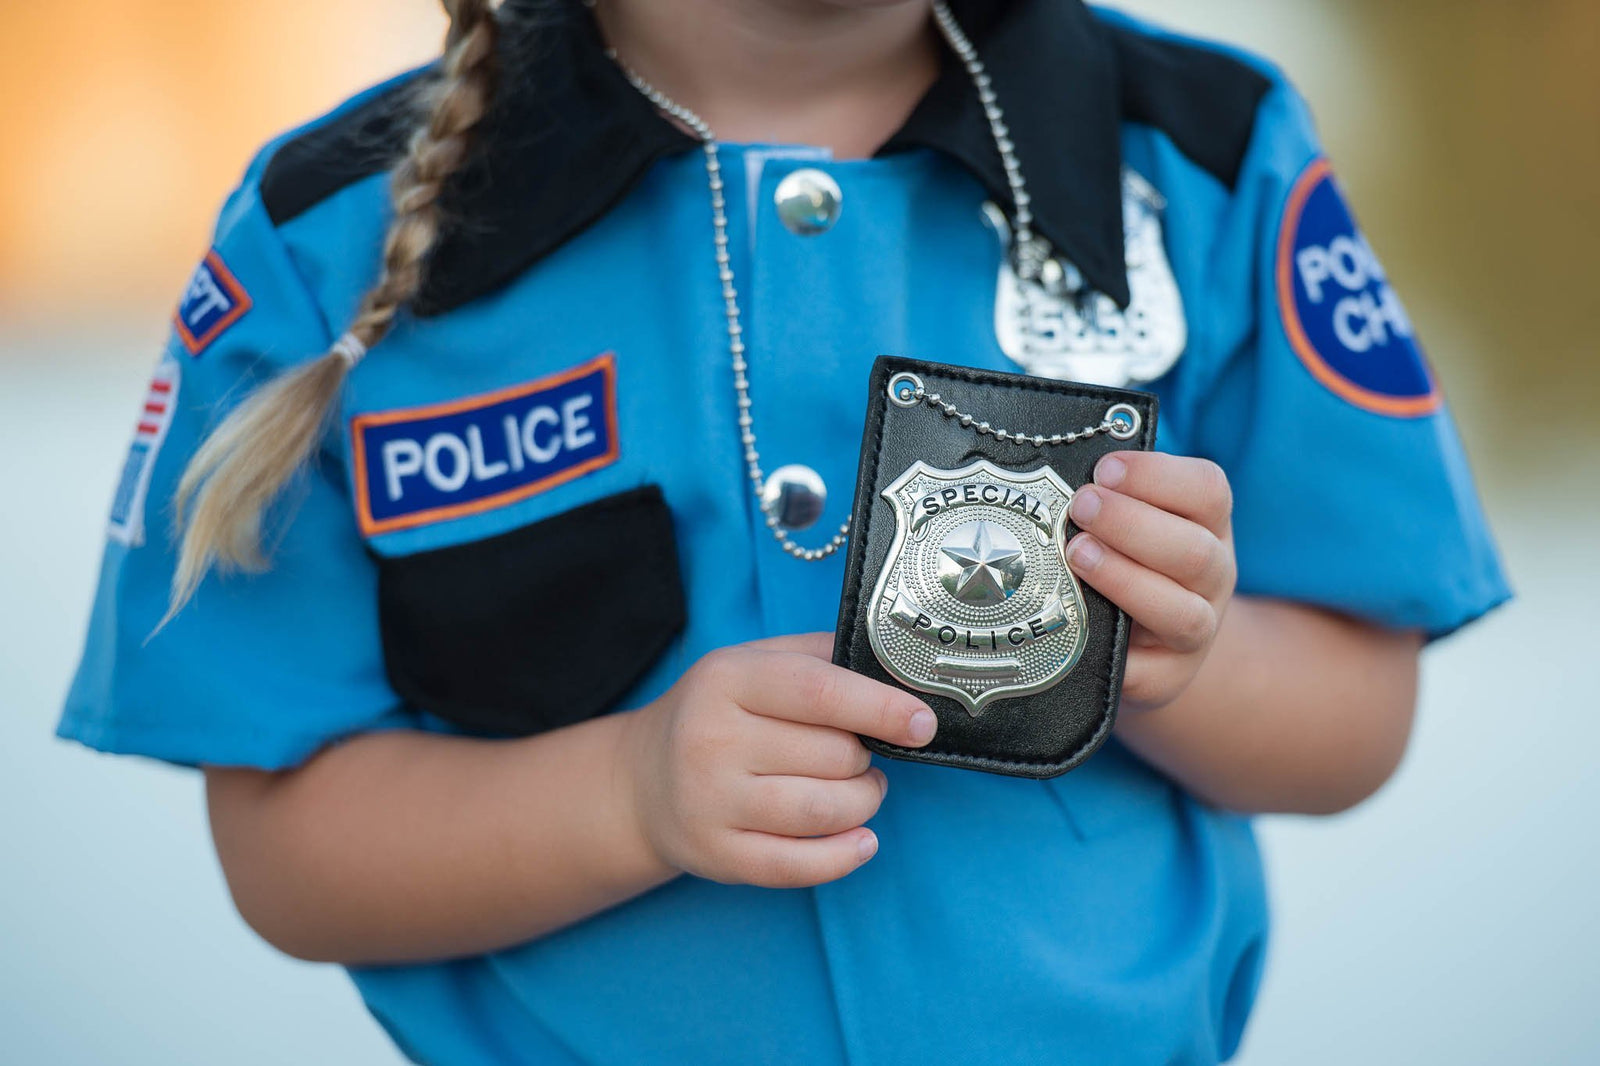 Dress-Up-America Police Badge For Kids - Pretend Play NYPD Badge With Chain & Belt Clip